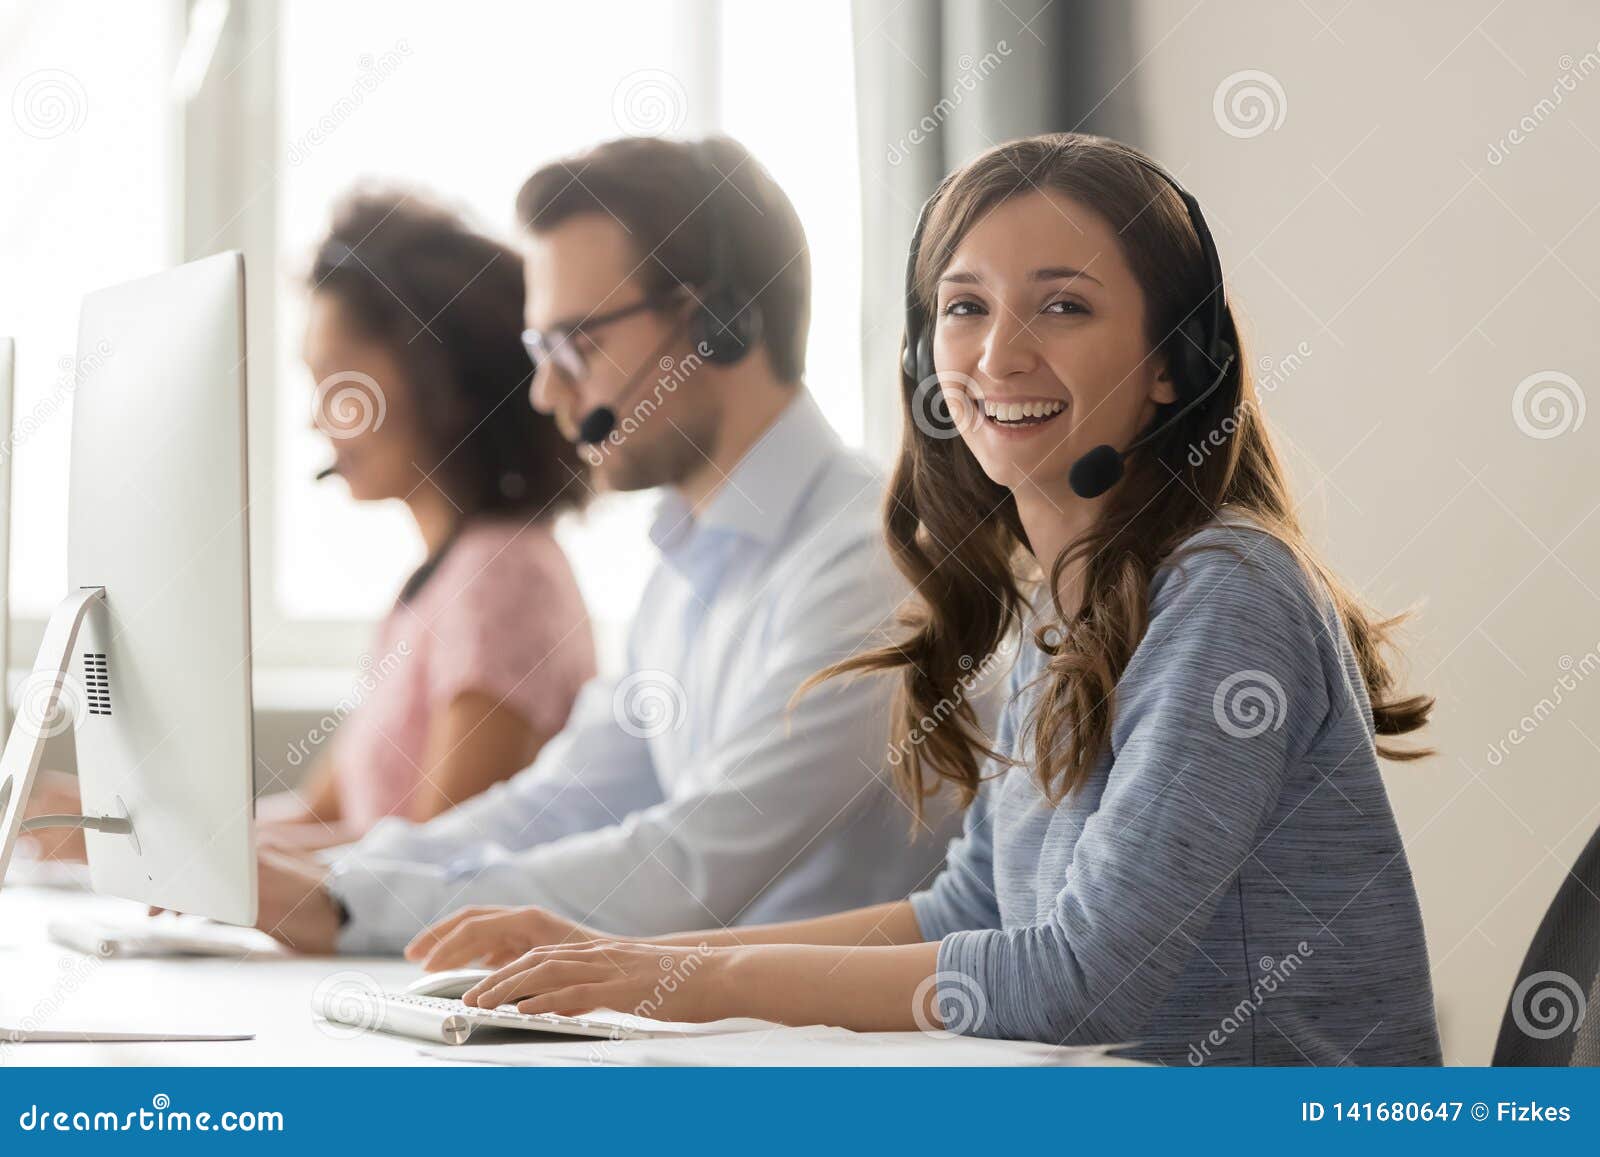 happy businesswoman call center agent looking at camera at workplace